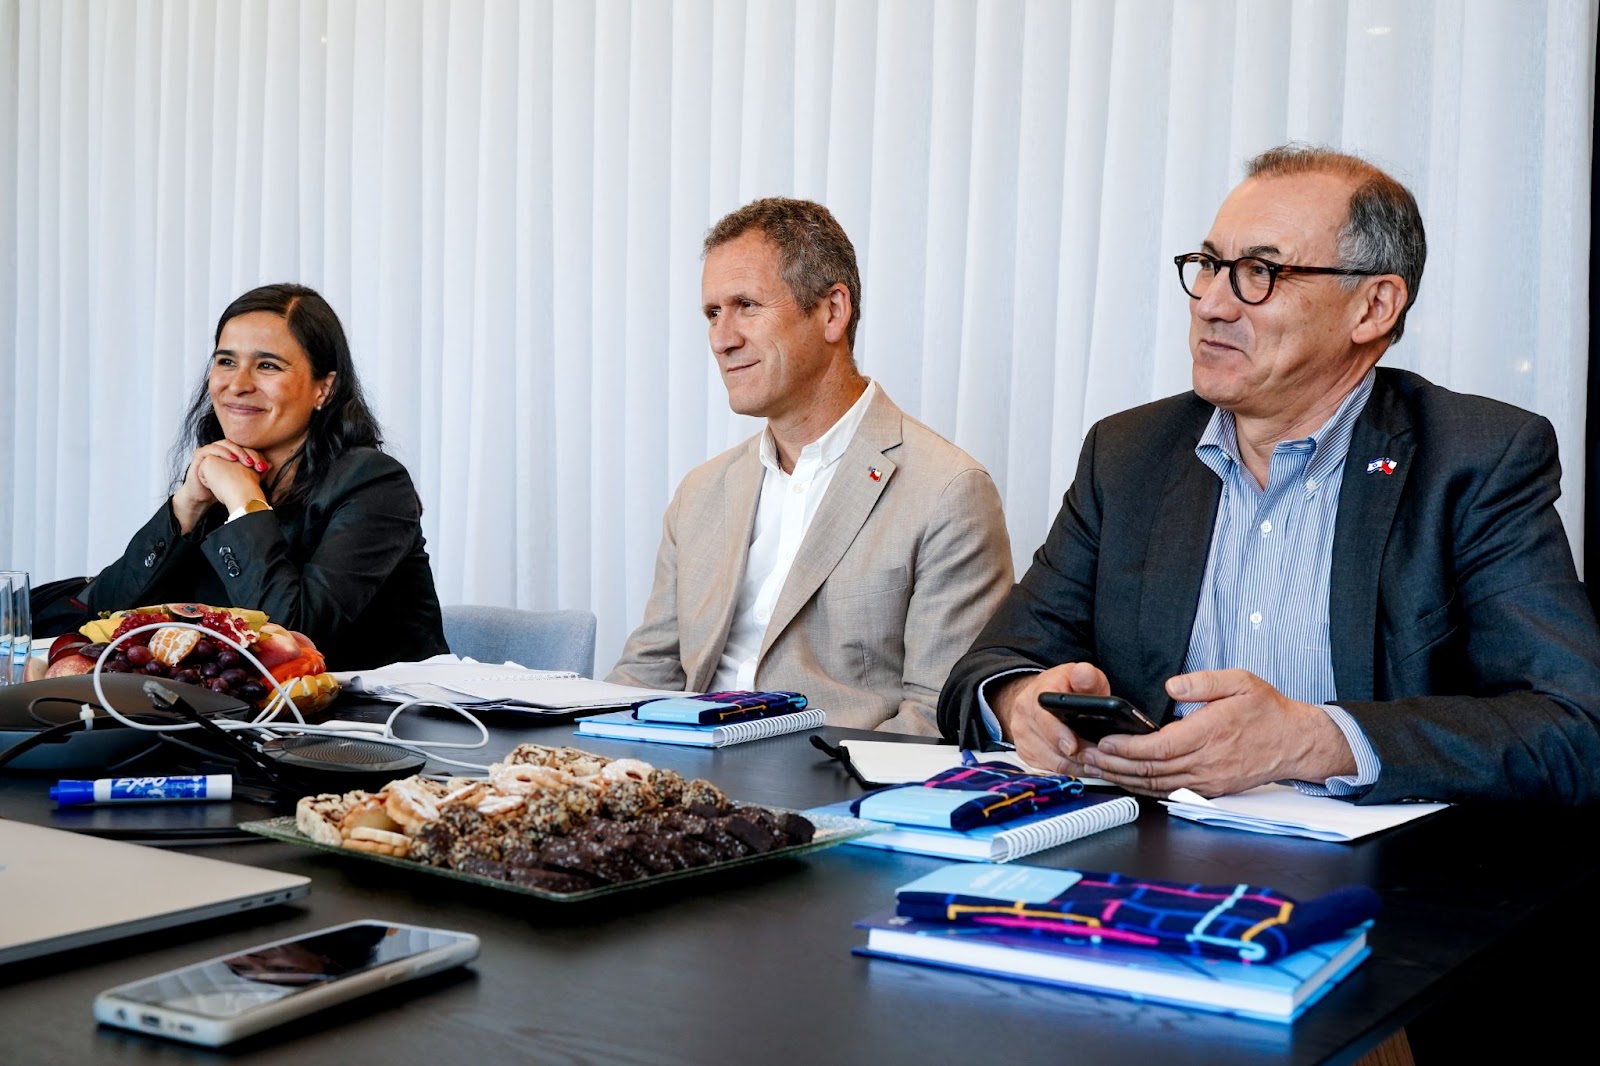 From left to right: Ms. Marion Fuentes; Minister Juan Carlos Muñoz Abogabir; and Ambassador Jorge Carvajal at a meeting with Optibus representatives to discuss the role of technology in securing the future of public transportation in Chile.